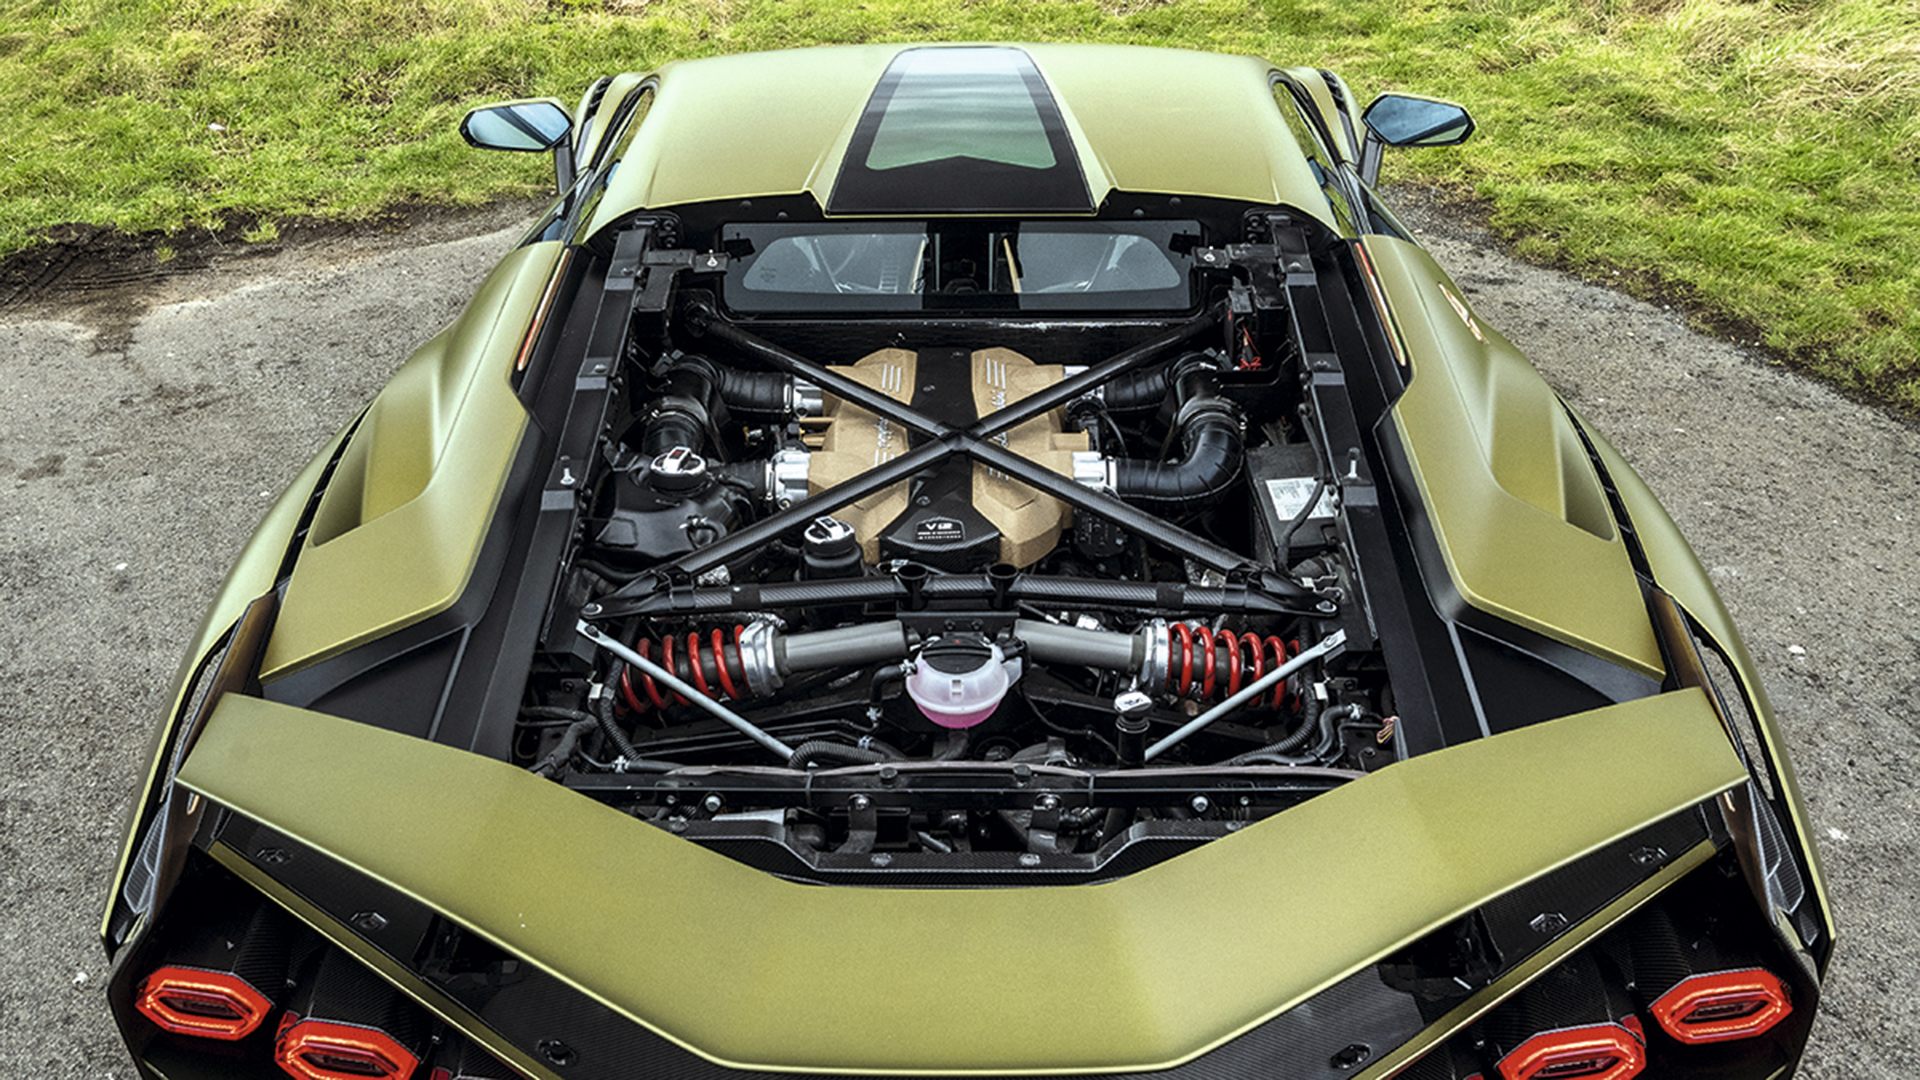 Lamborghini's engine is V12.  The conversion of electricity would end the legacy of its creator.  E-fuels can save it and are ready to wait for its development